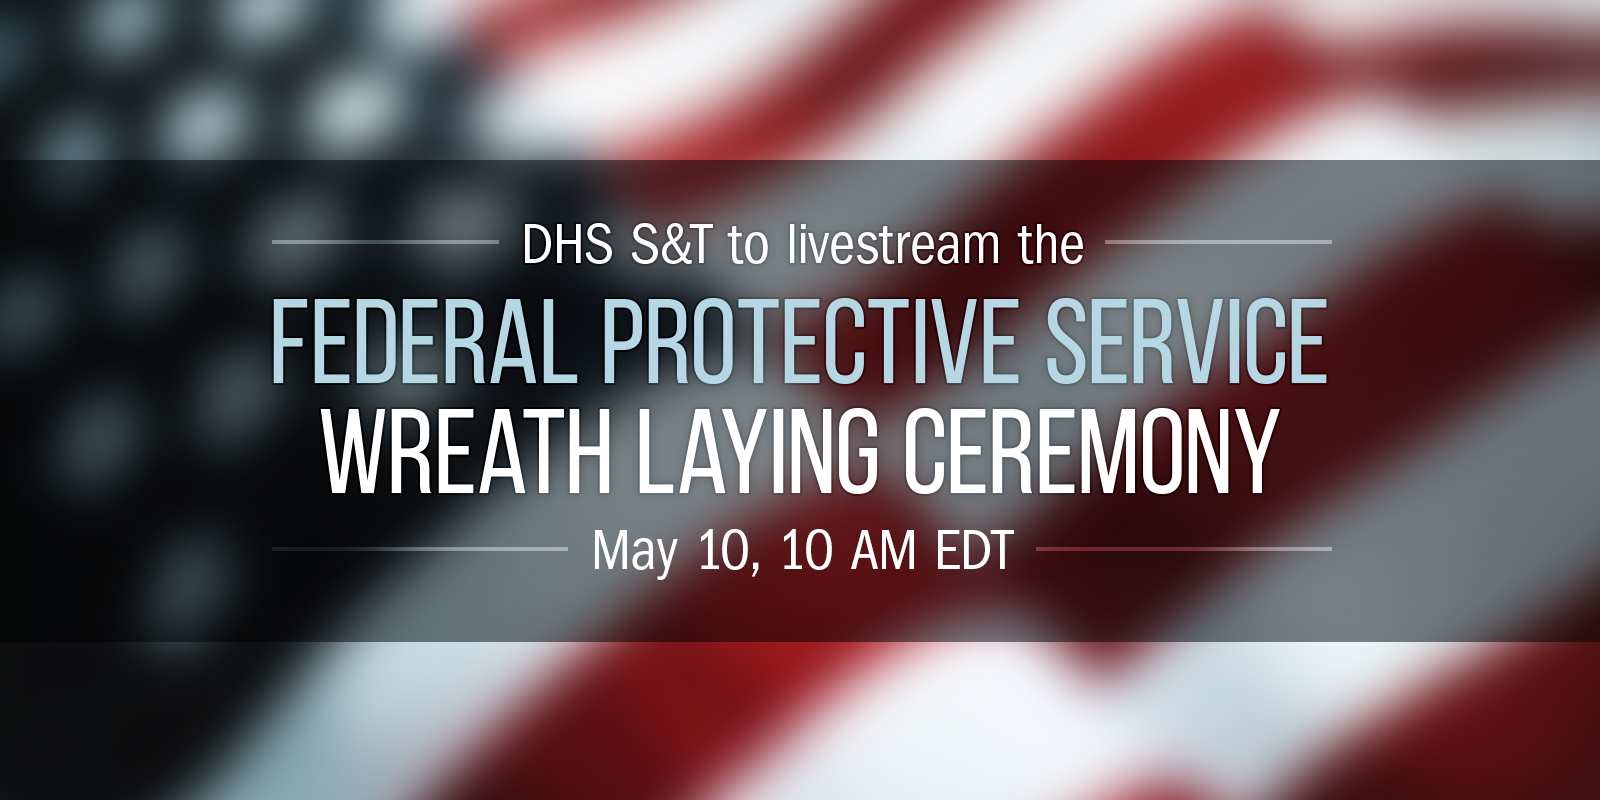 DHS S&T to livestream the FPS Wreath Laying Ceremony; May 10, 10:00 AM EDT.